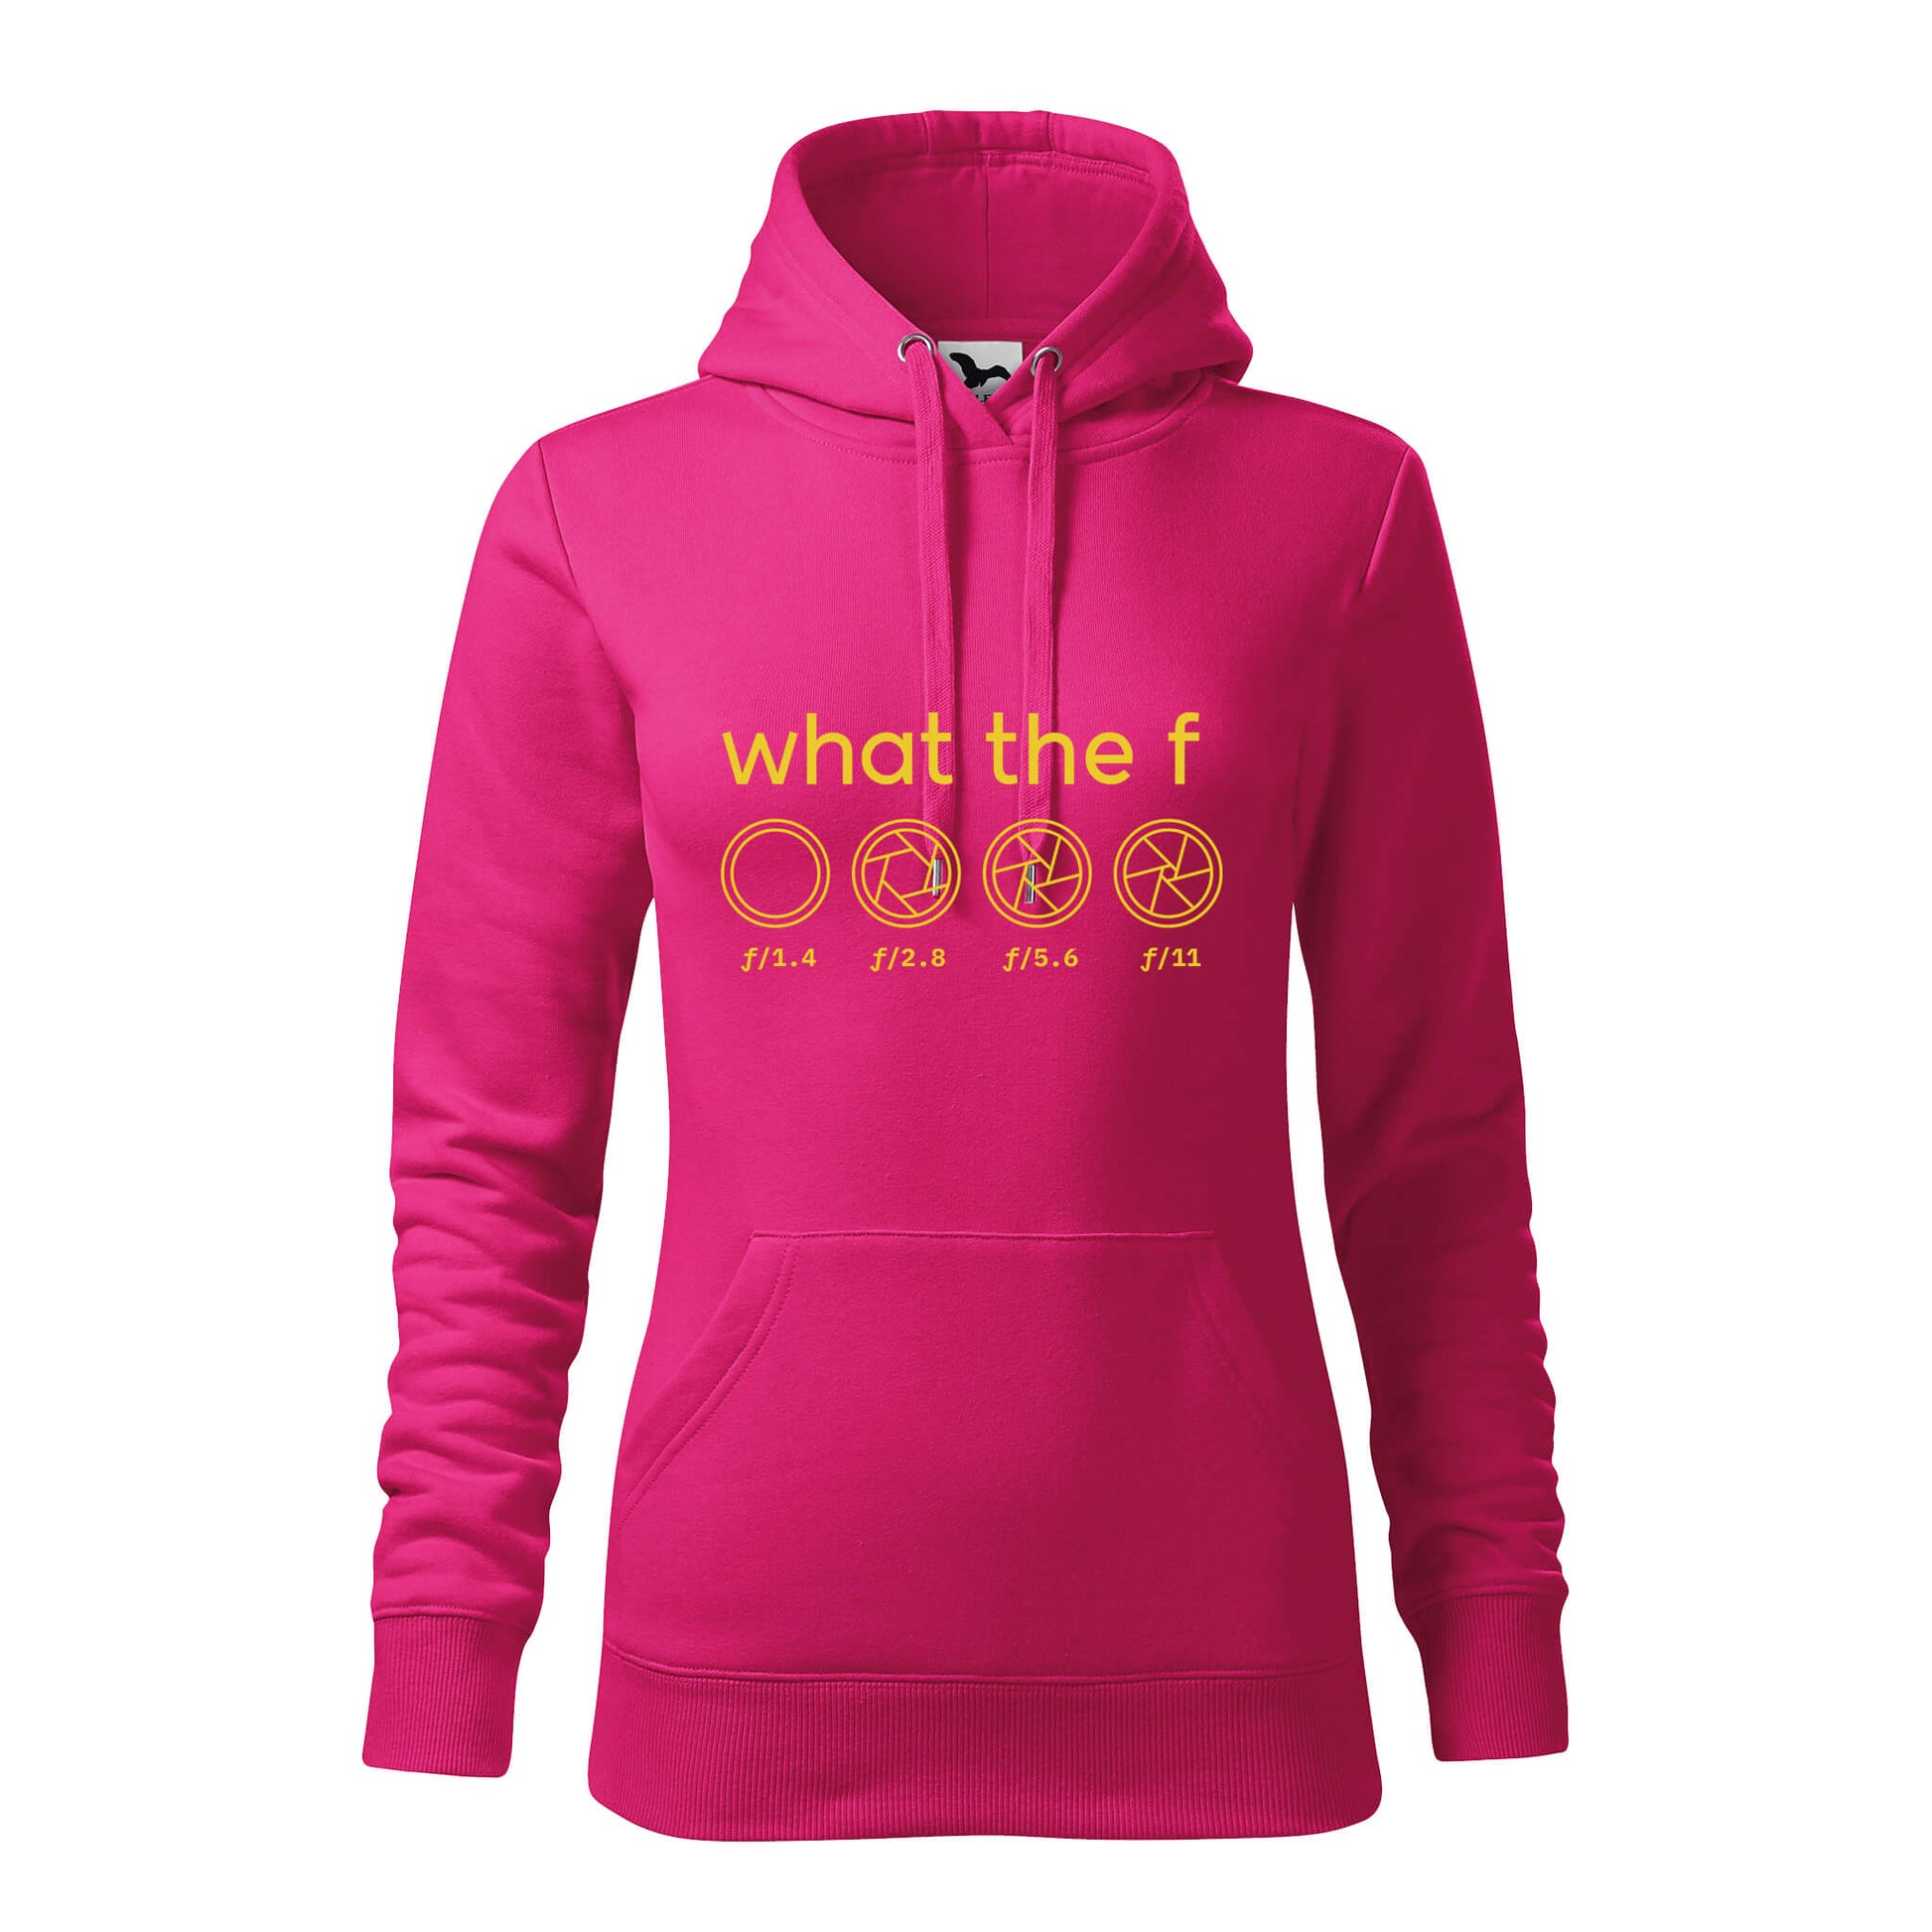 What the f photography hoodie - rvdesignprint